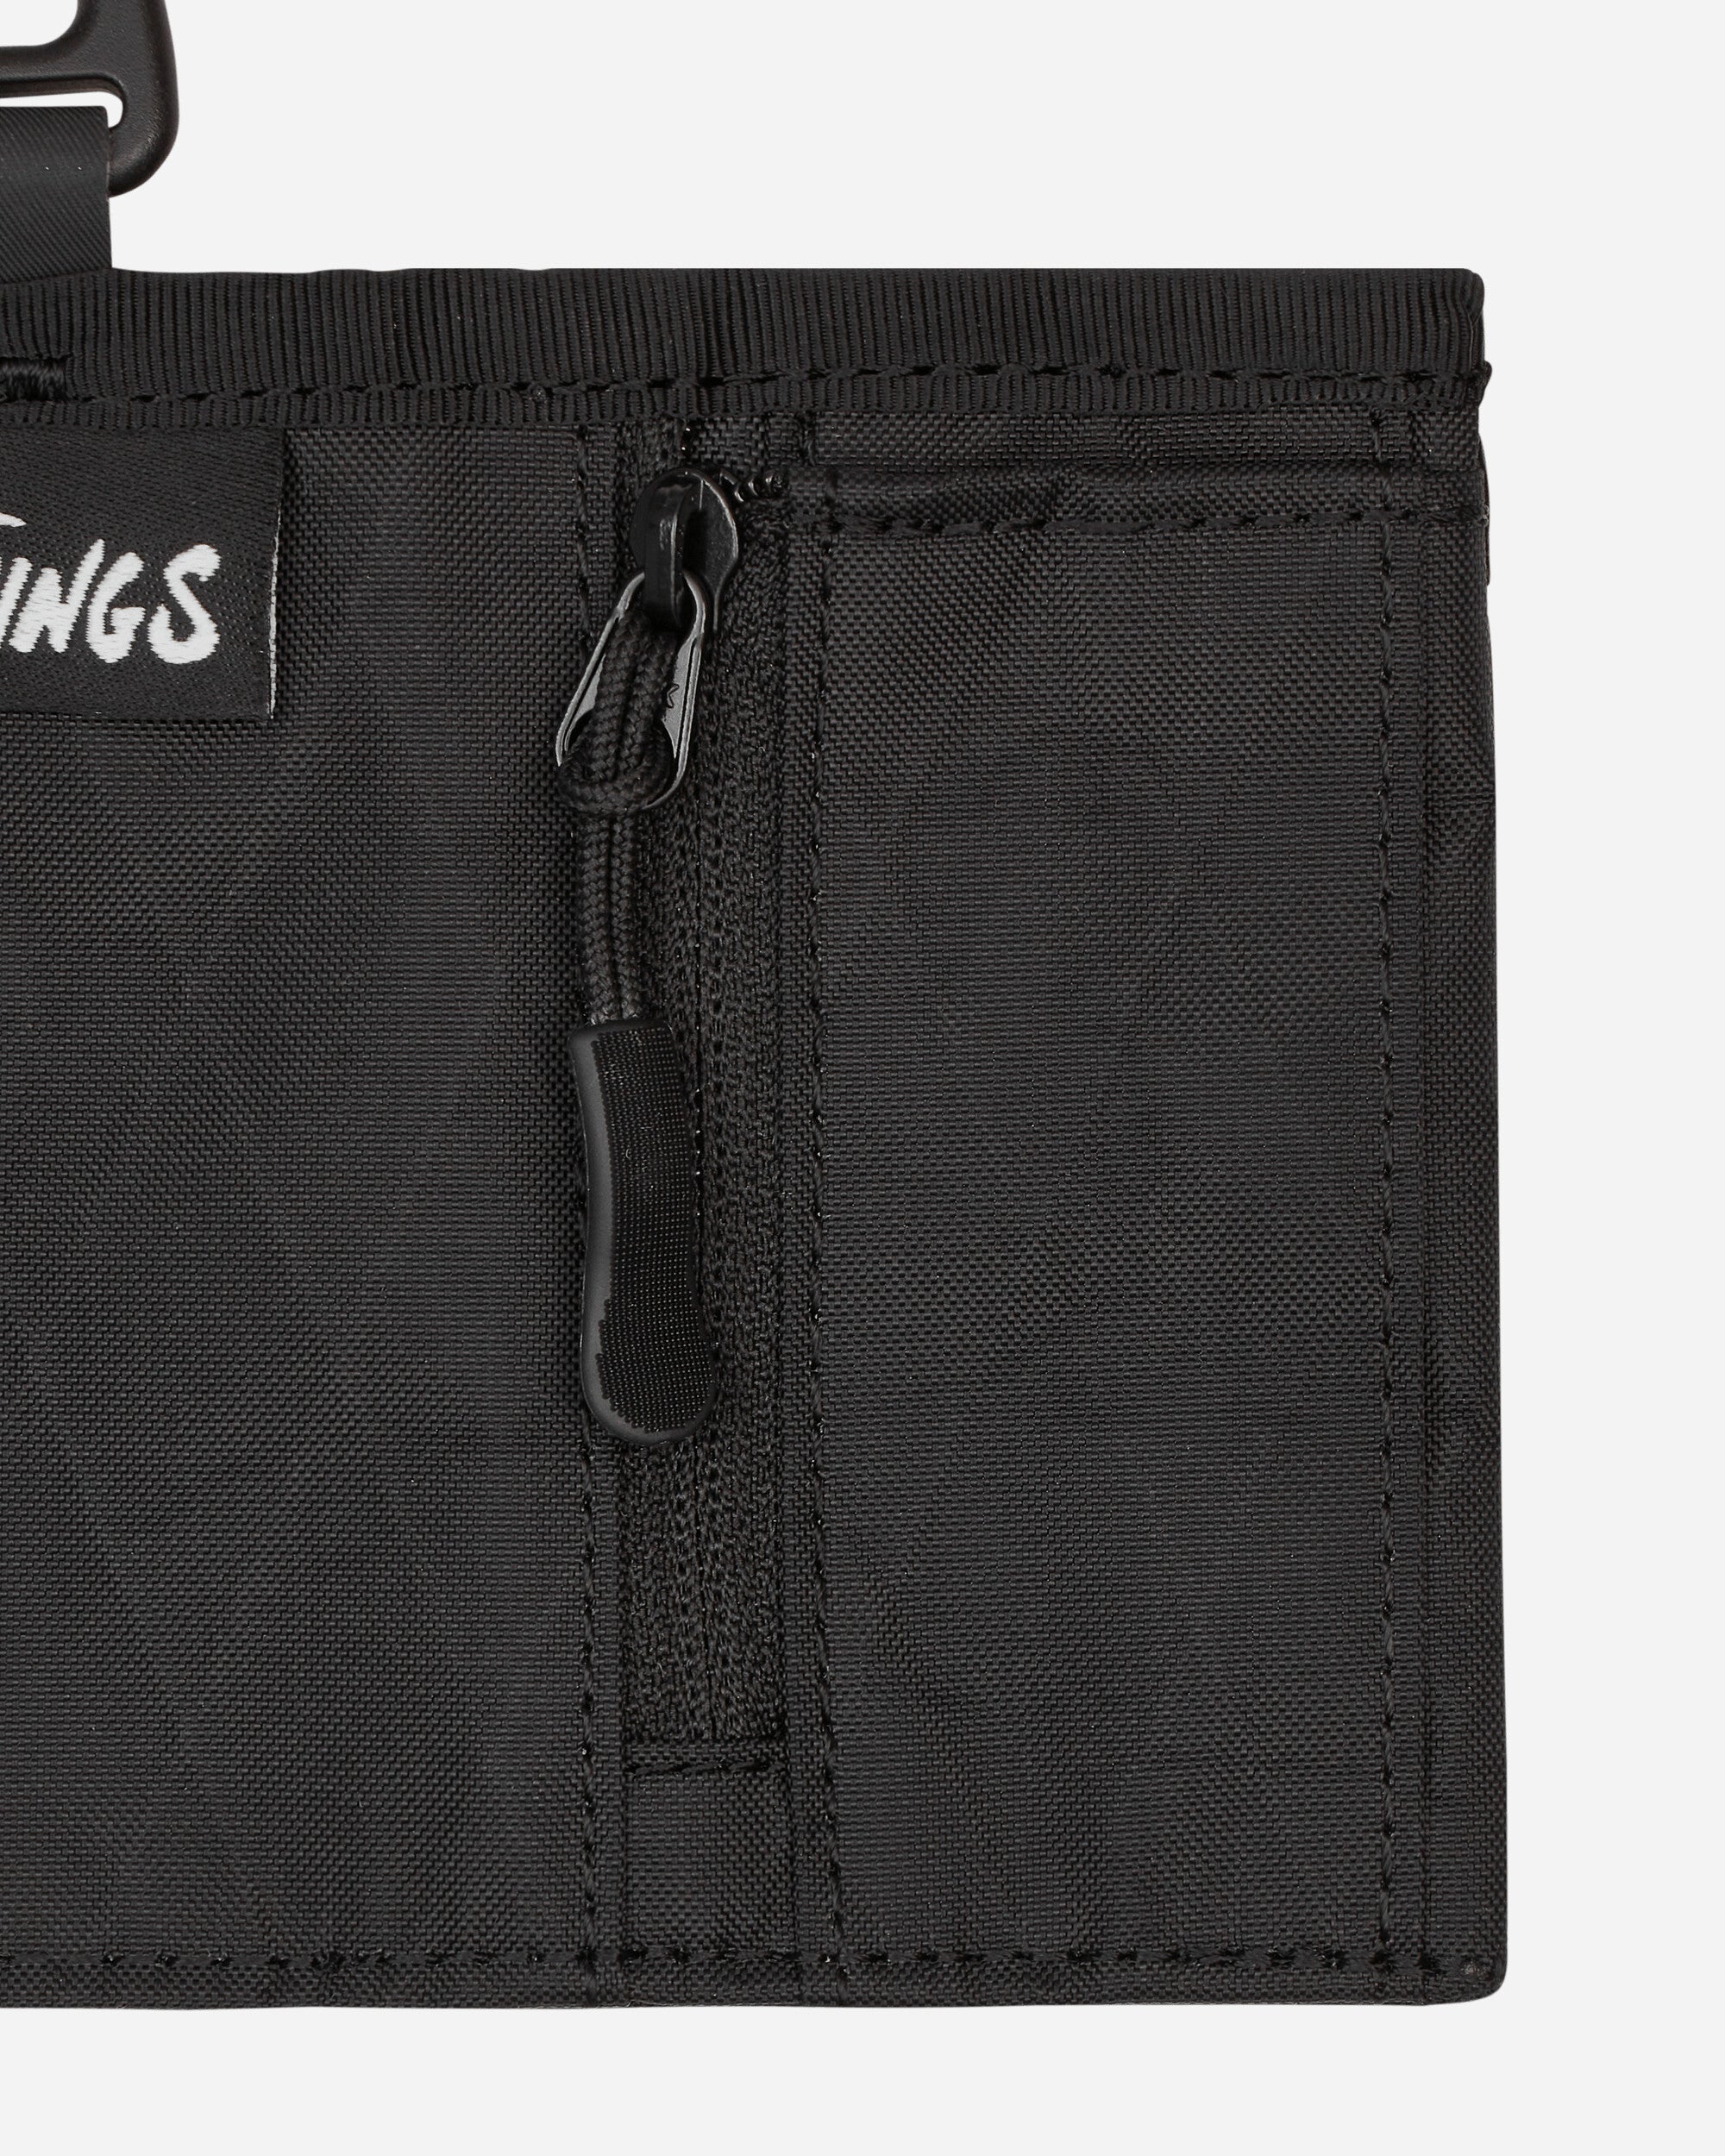 Wild Things X-Pac Strap Wallet Black Wallets and Cardholders Wallets WT231-020 BLACK